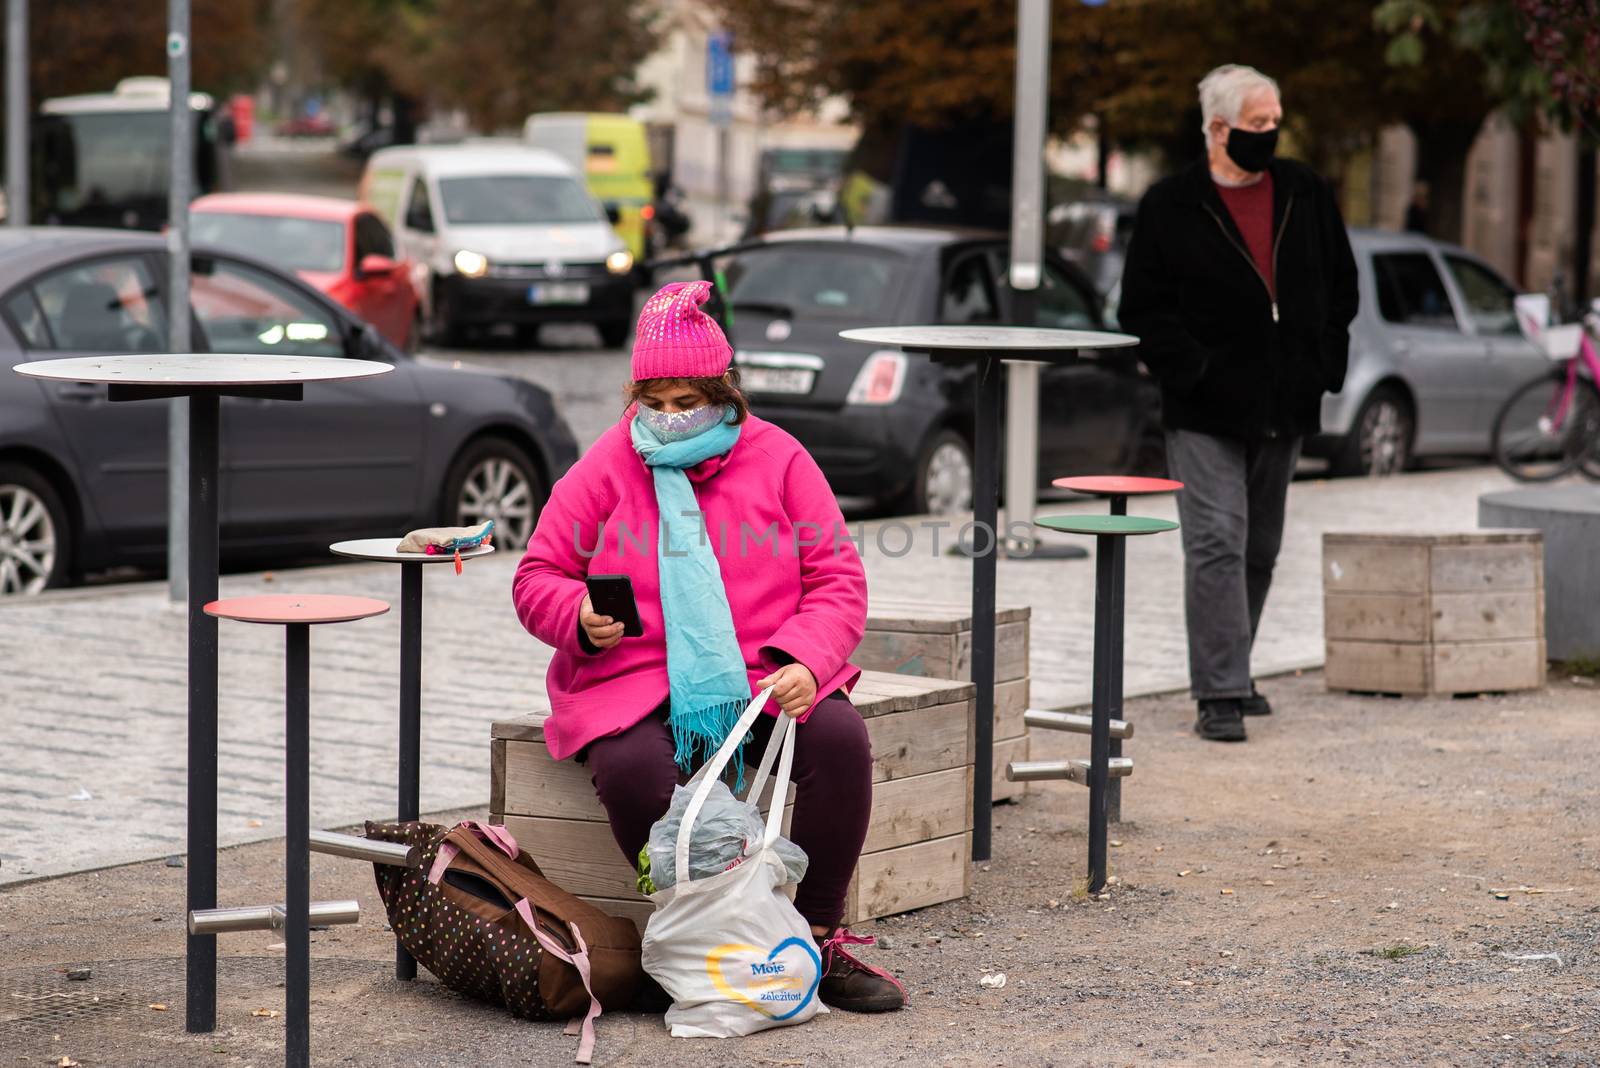 Woman carrying a mask resting with heavy bags during quarantine period due to outbreak of COVID-19 as winter is starting. Prague, Czech Republic